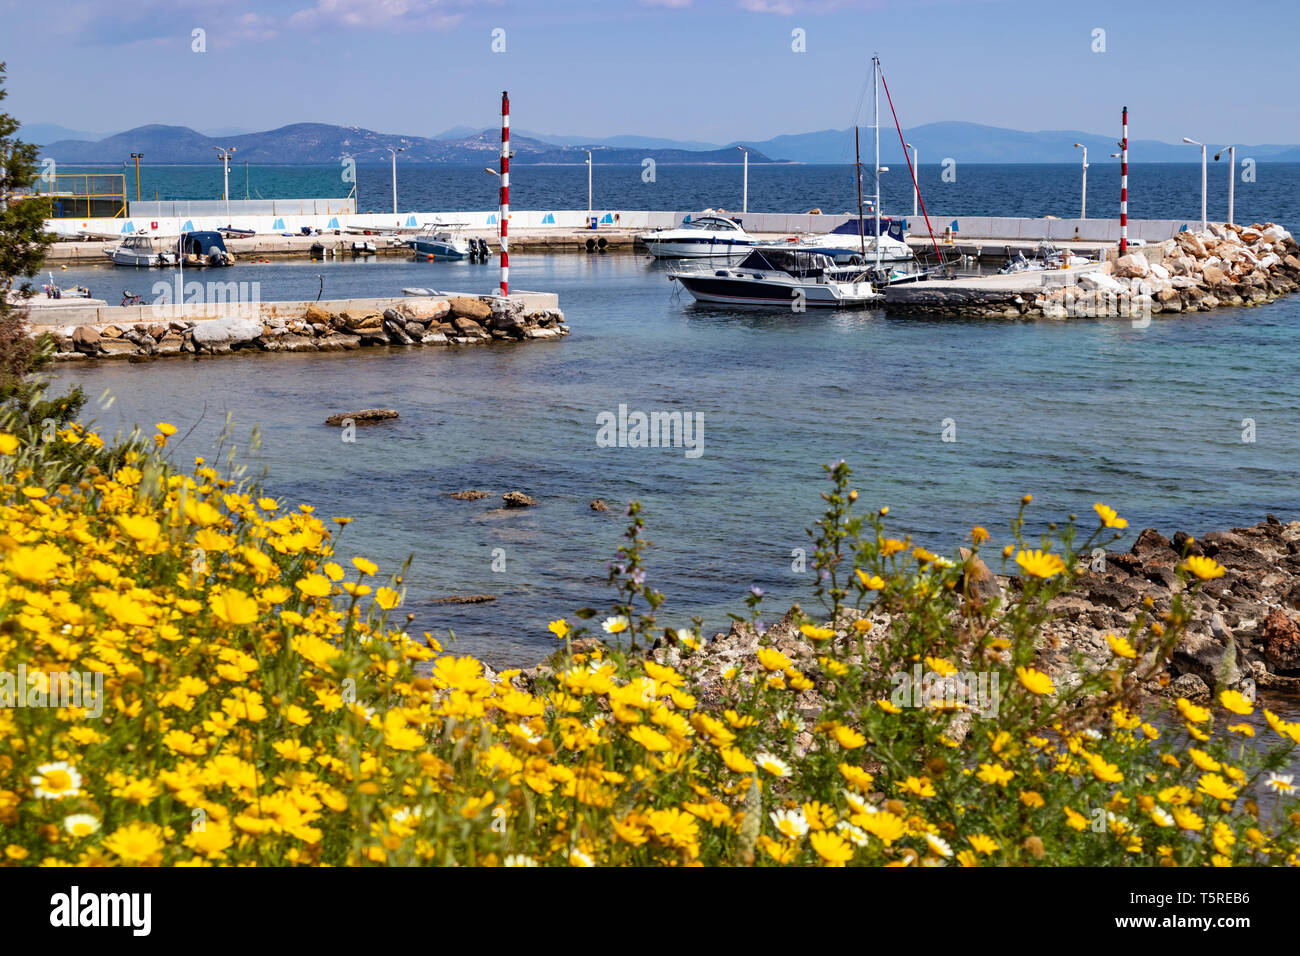 Yachts in a small marina, yellow color daisies flowers and blue sea background. Greece, Attica Stock Photo